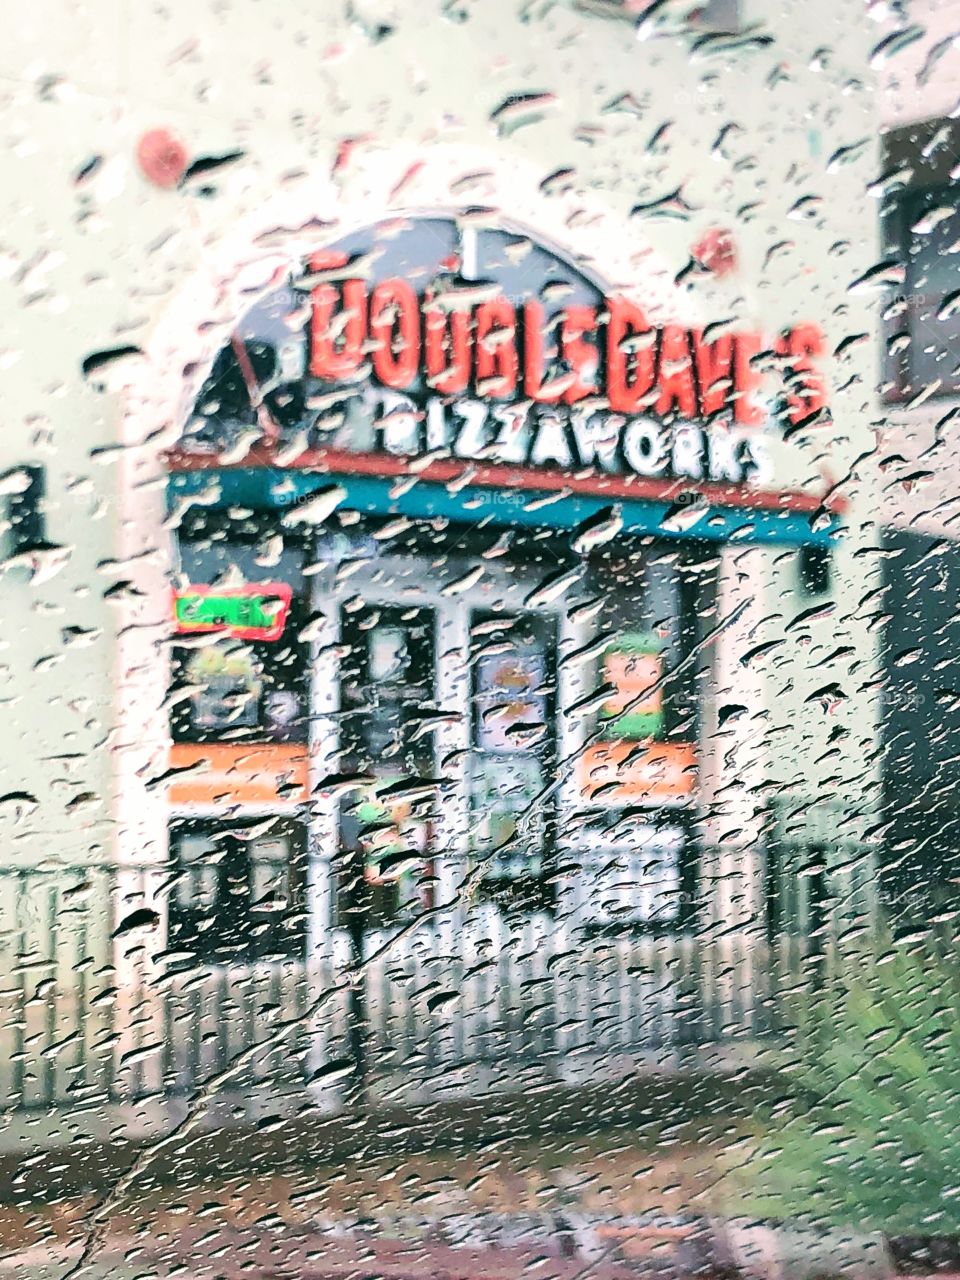 Finding a new pizza place to eat at always makes a rainy day an even more special day.